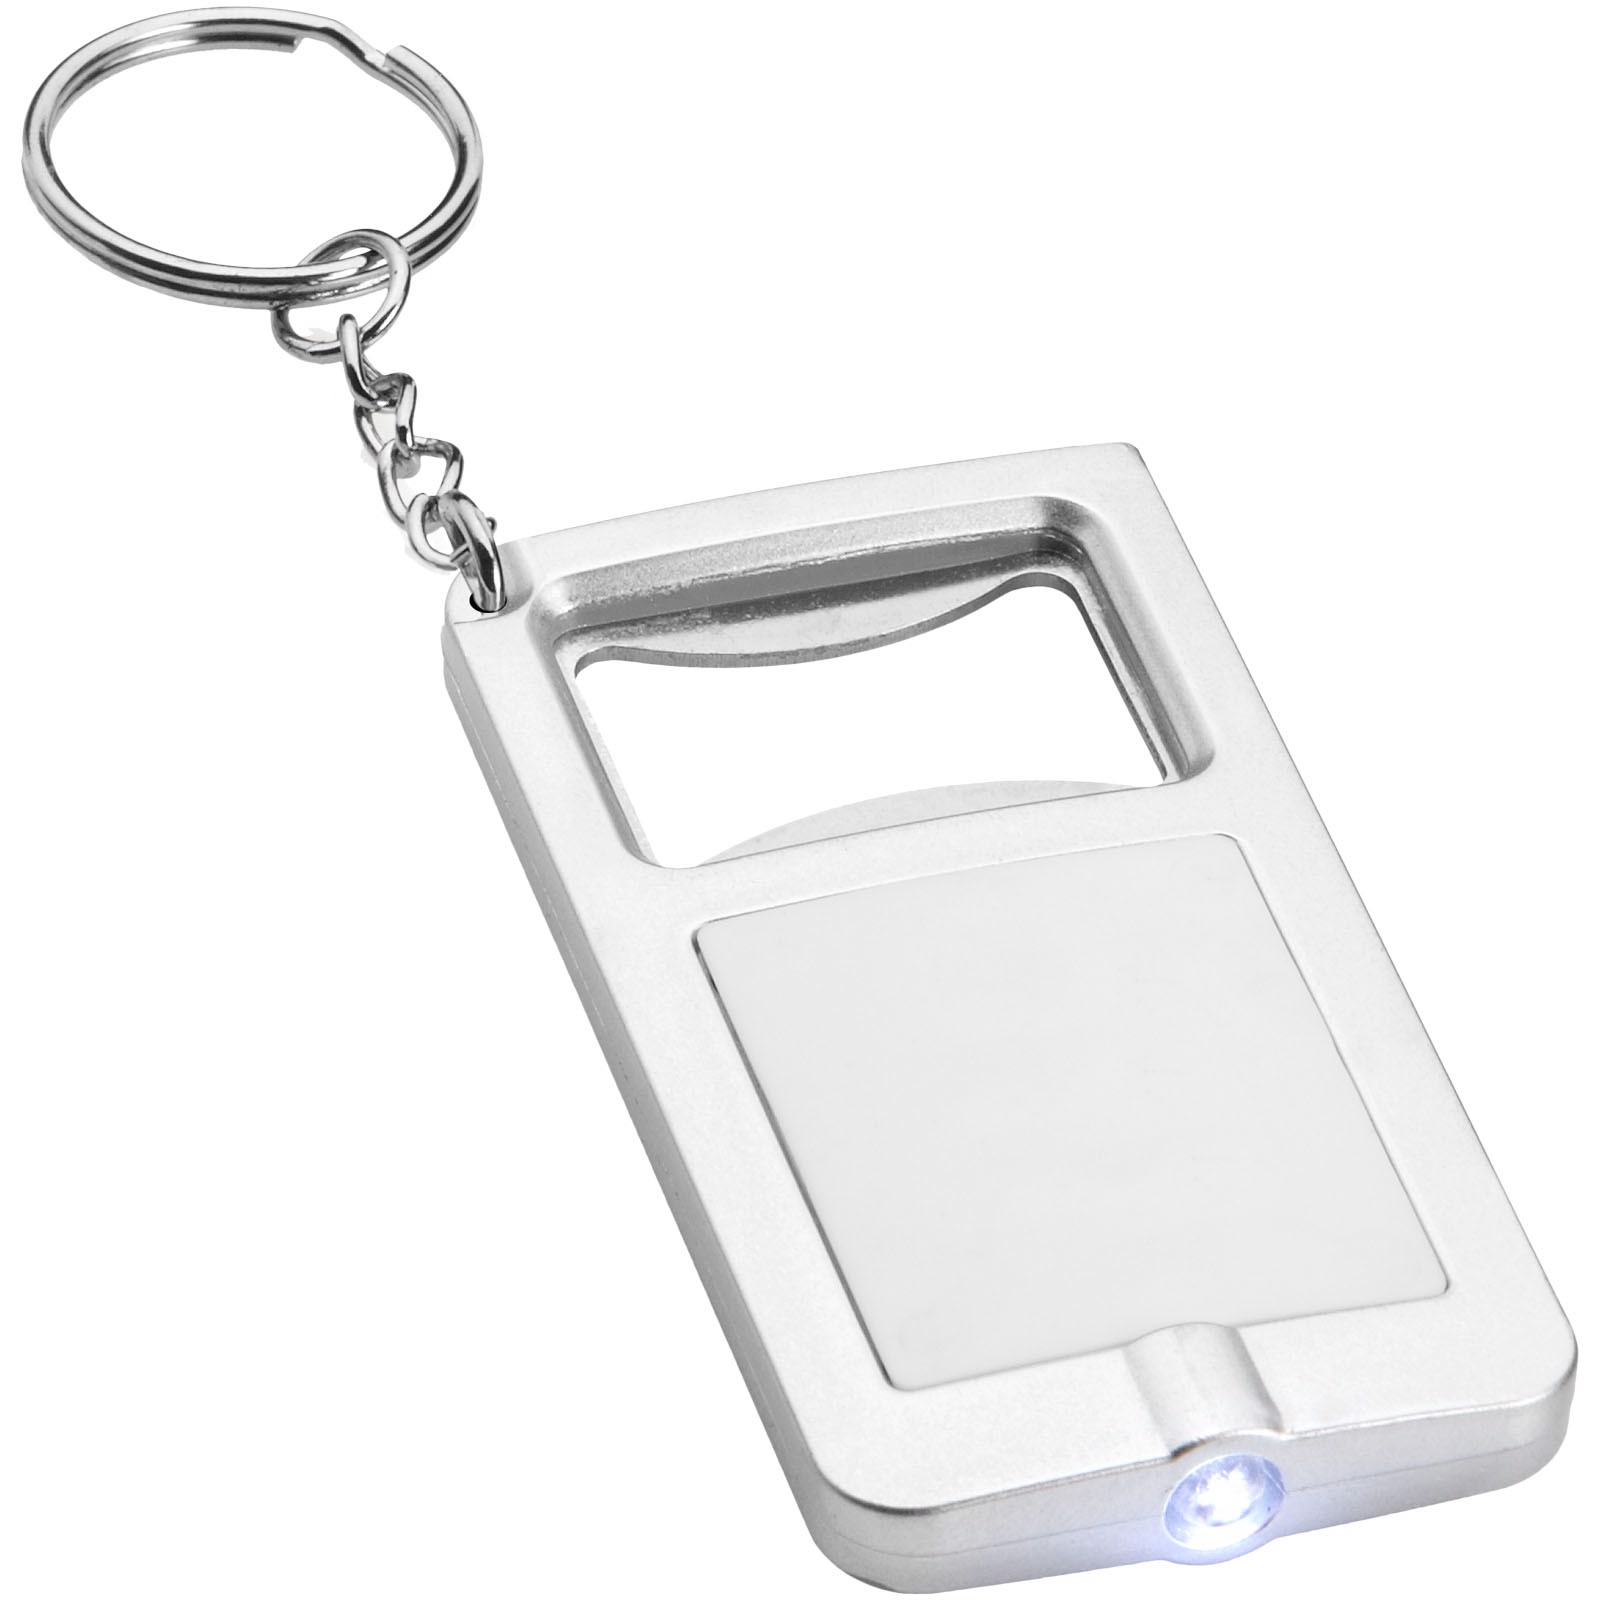 Orcus LED keychain light and bottle opener - White / Silver